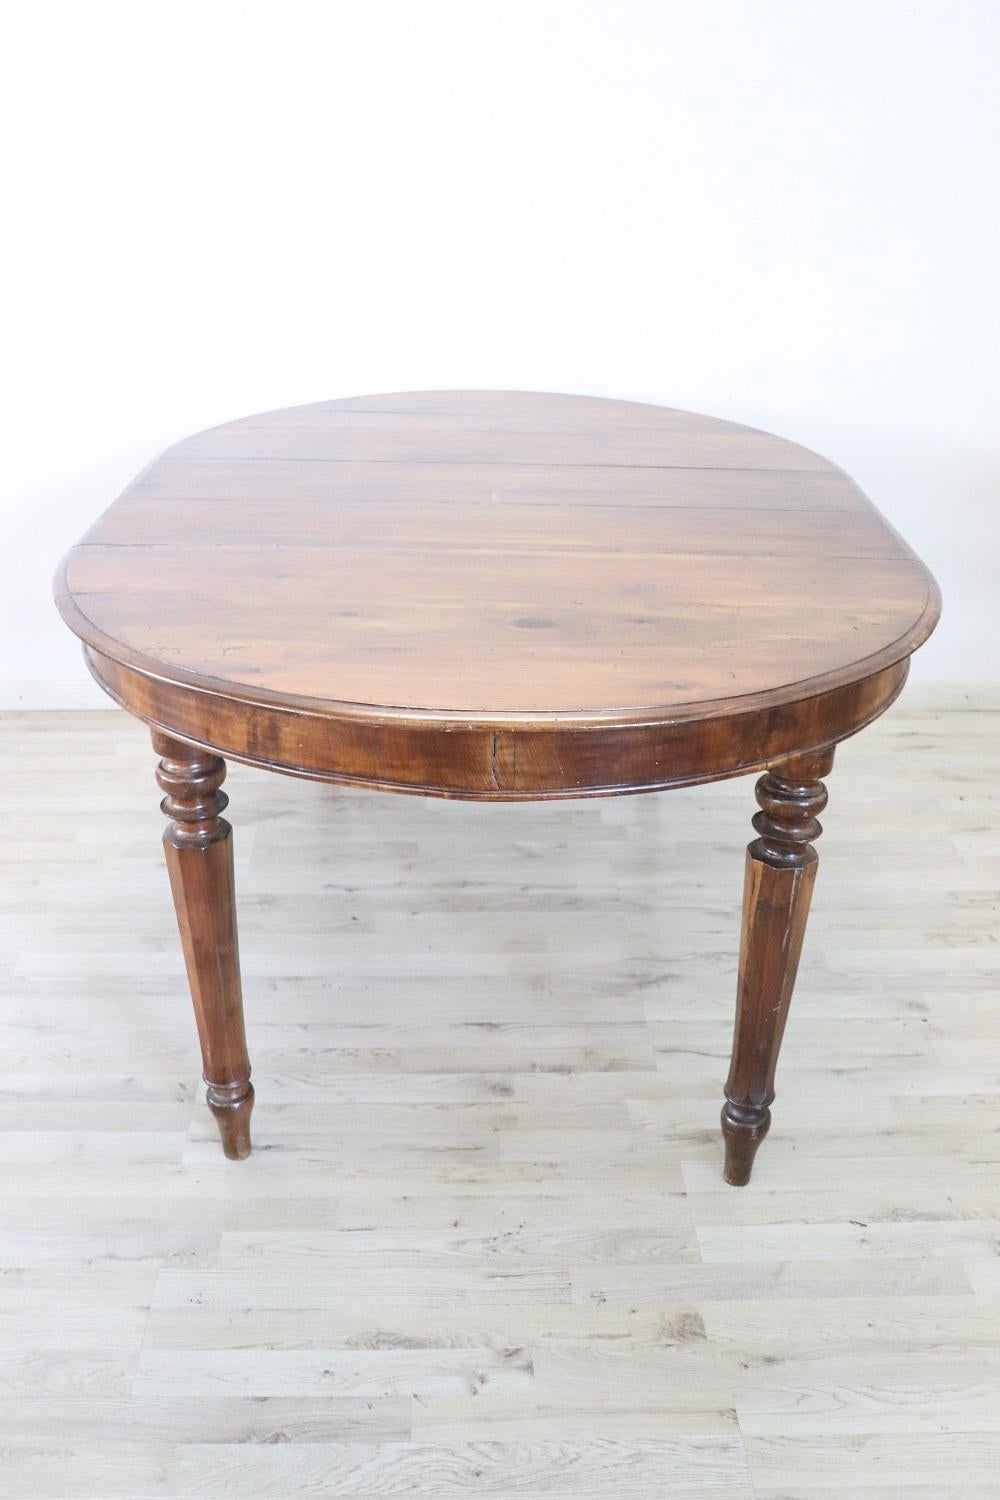 19th Century Italian Walnut Oval Antique Dining Room Table In Excellent Condition For Sale In Casale Monferrato, IT